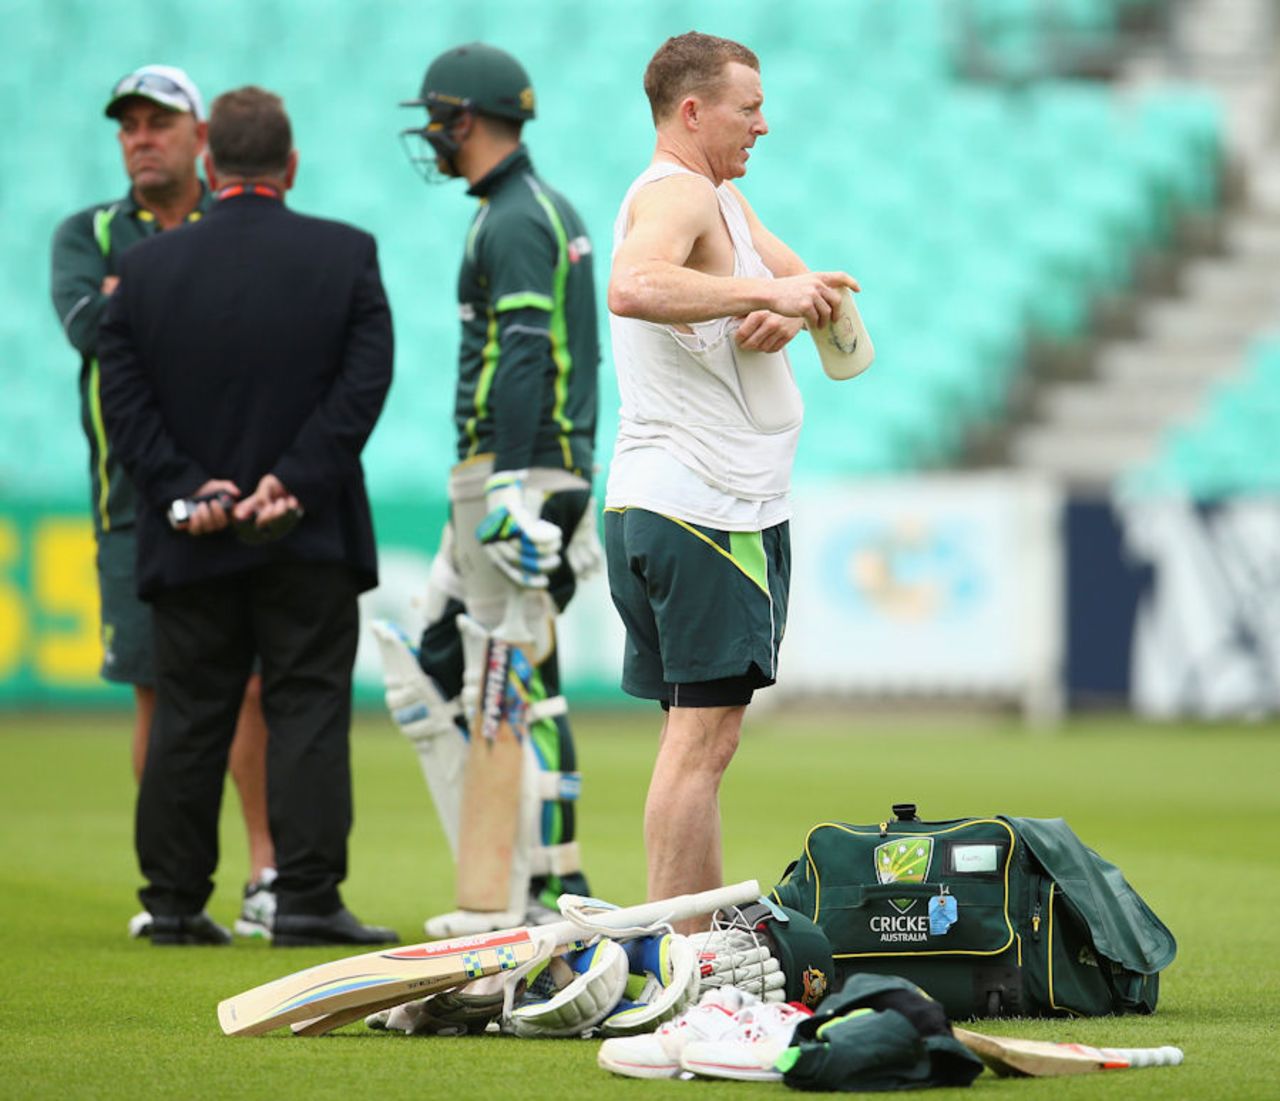 Chris Rogers prepares to net at The Oval ahead of his final Test for Australia after confirming his international retirement